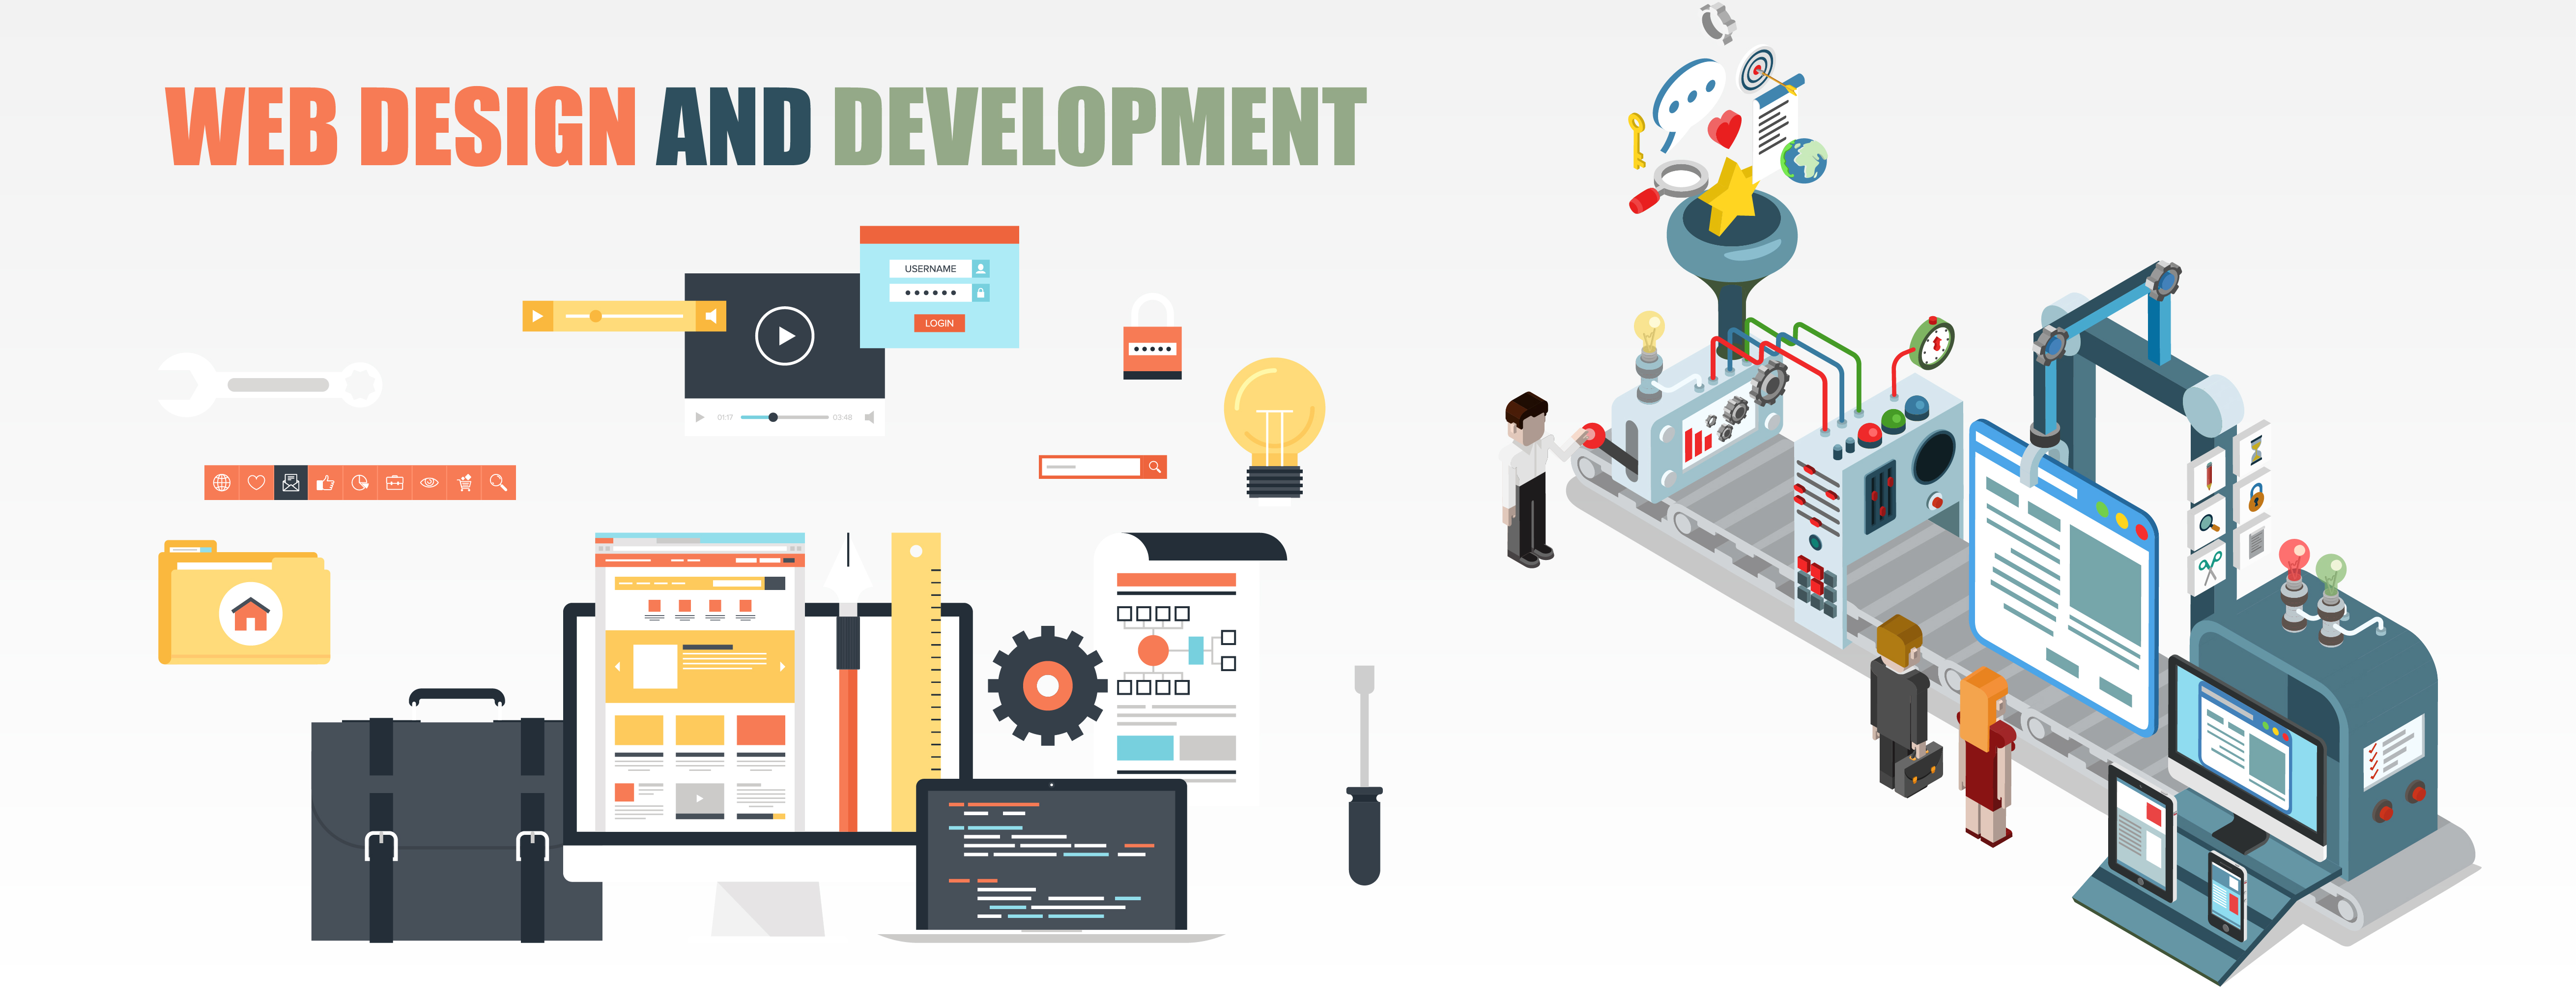 Website designing Company in Bhopal, India | Software Development company in Bhopal, India | Digital